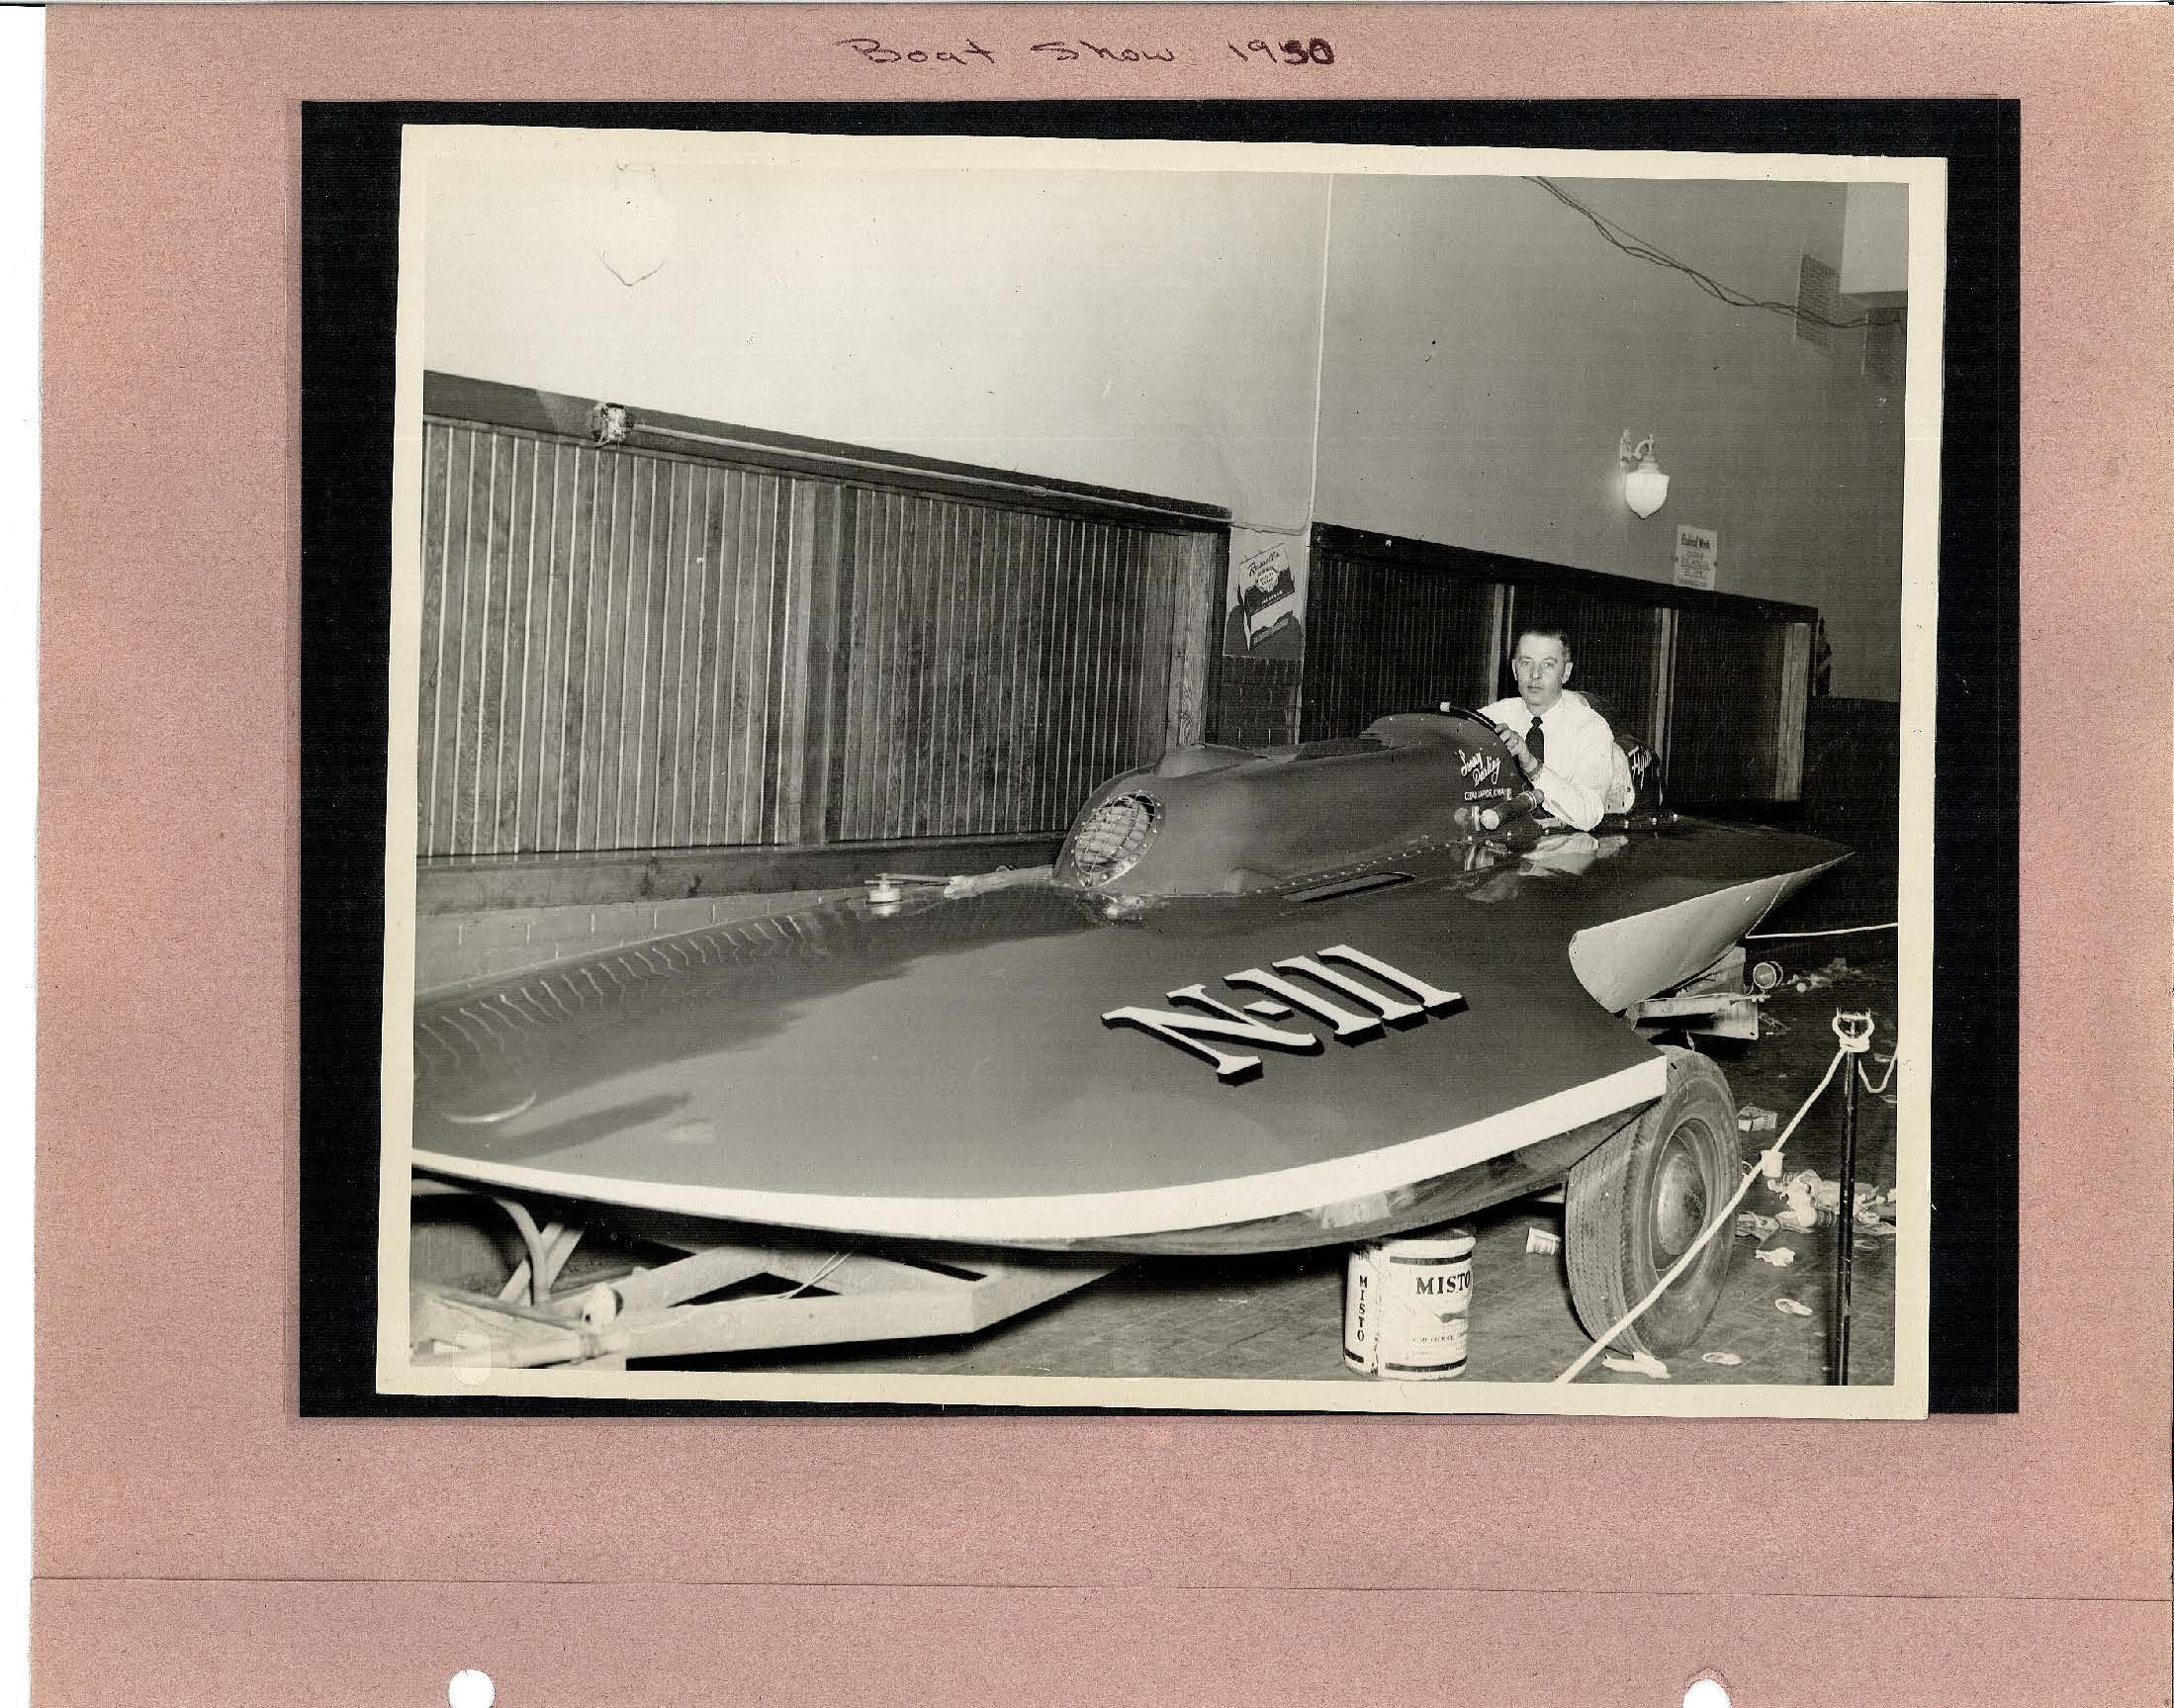 Photo taken at Boat show 1950 of small boat